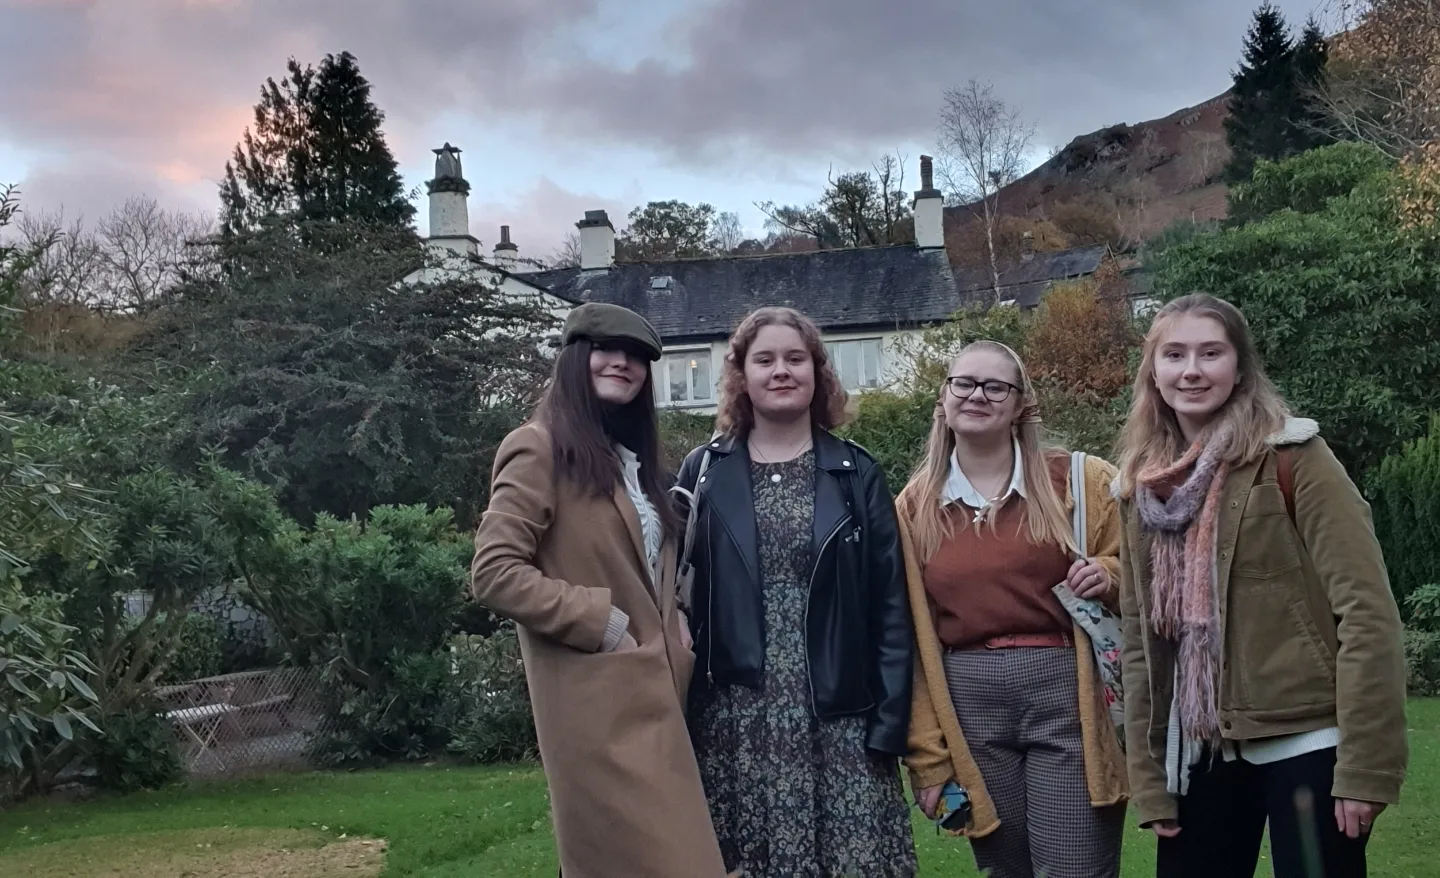 MA Literature students (from left to right) Kira Welland, Katherine Tweedy, Tabitha Siddle, and Hannah Jennison at Rydal Mount in Ambleside.